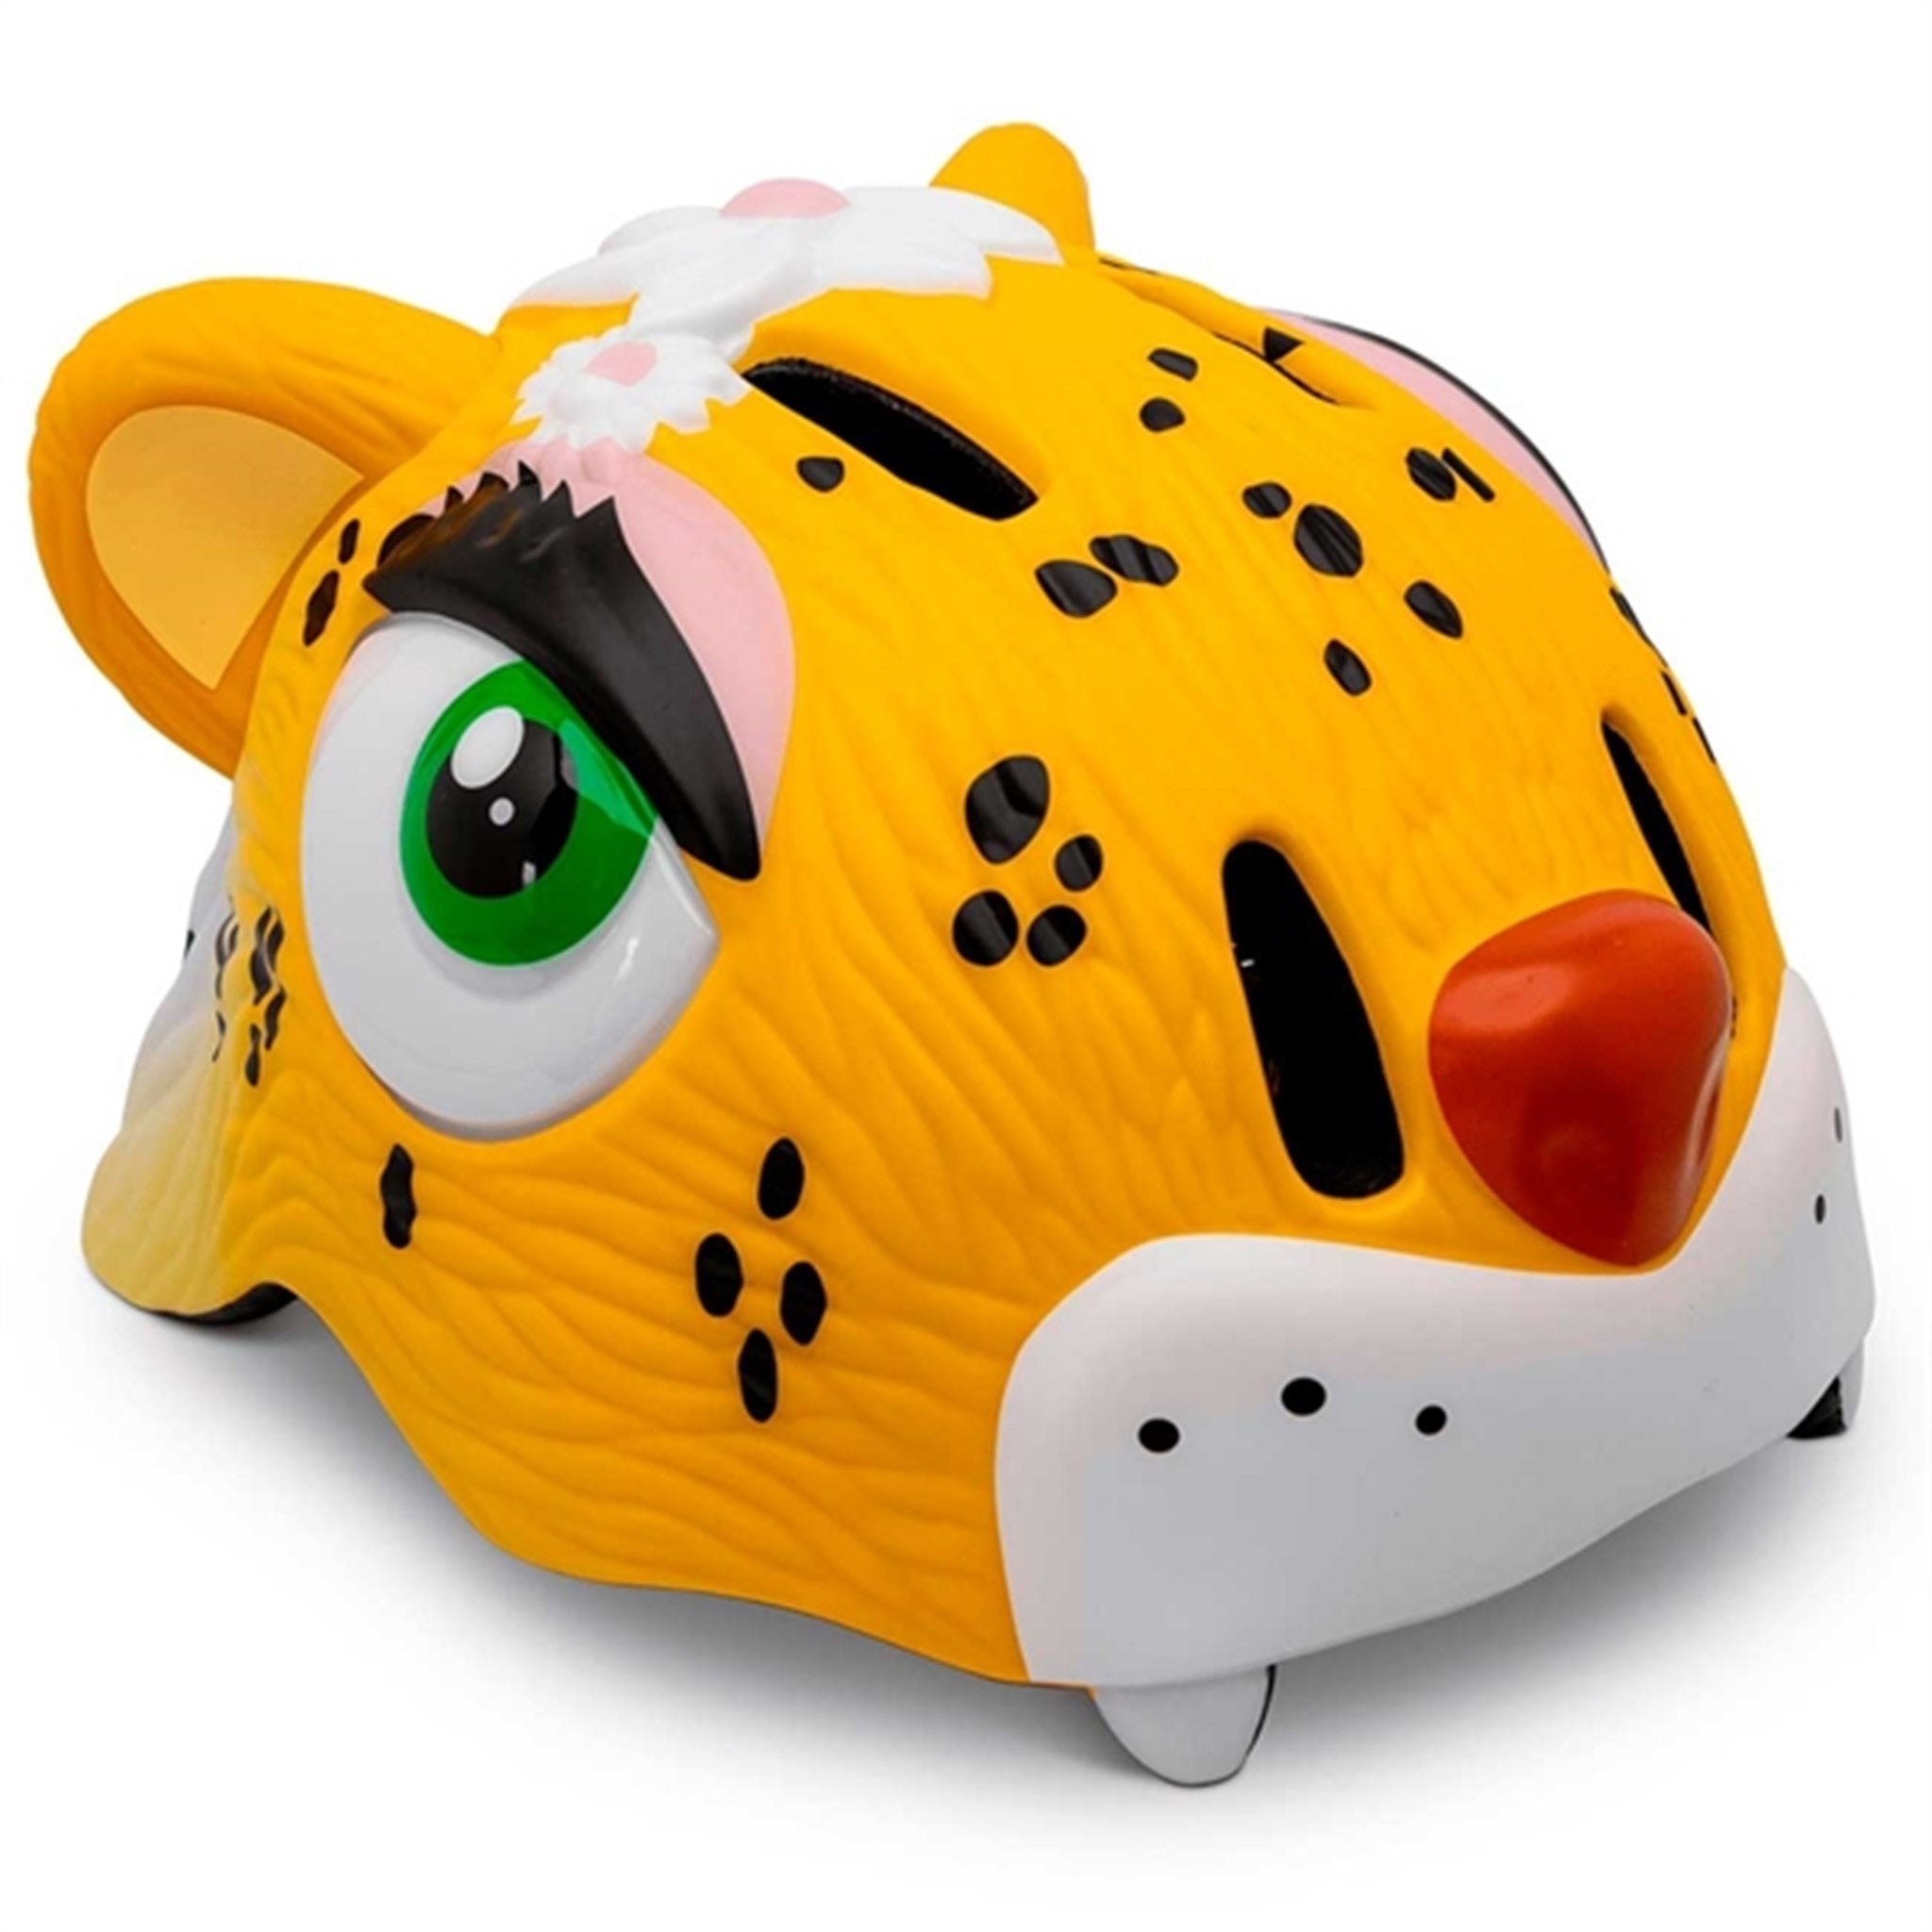 Crazy Safety Leopard Bicycle Helmet Yellow